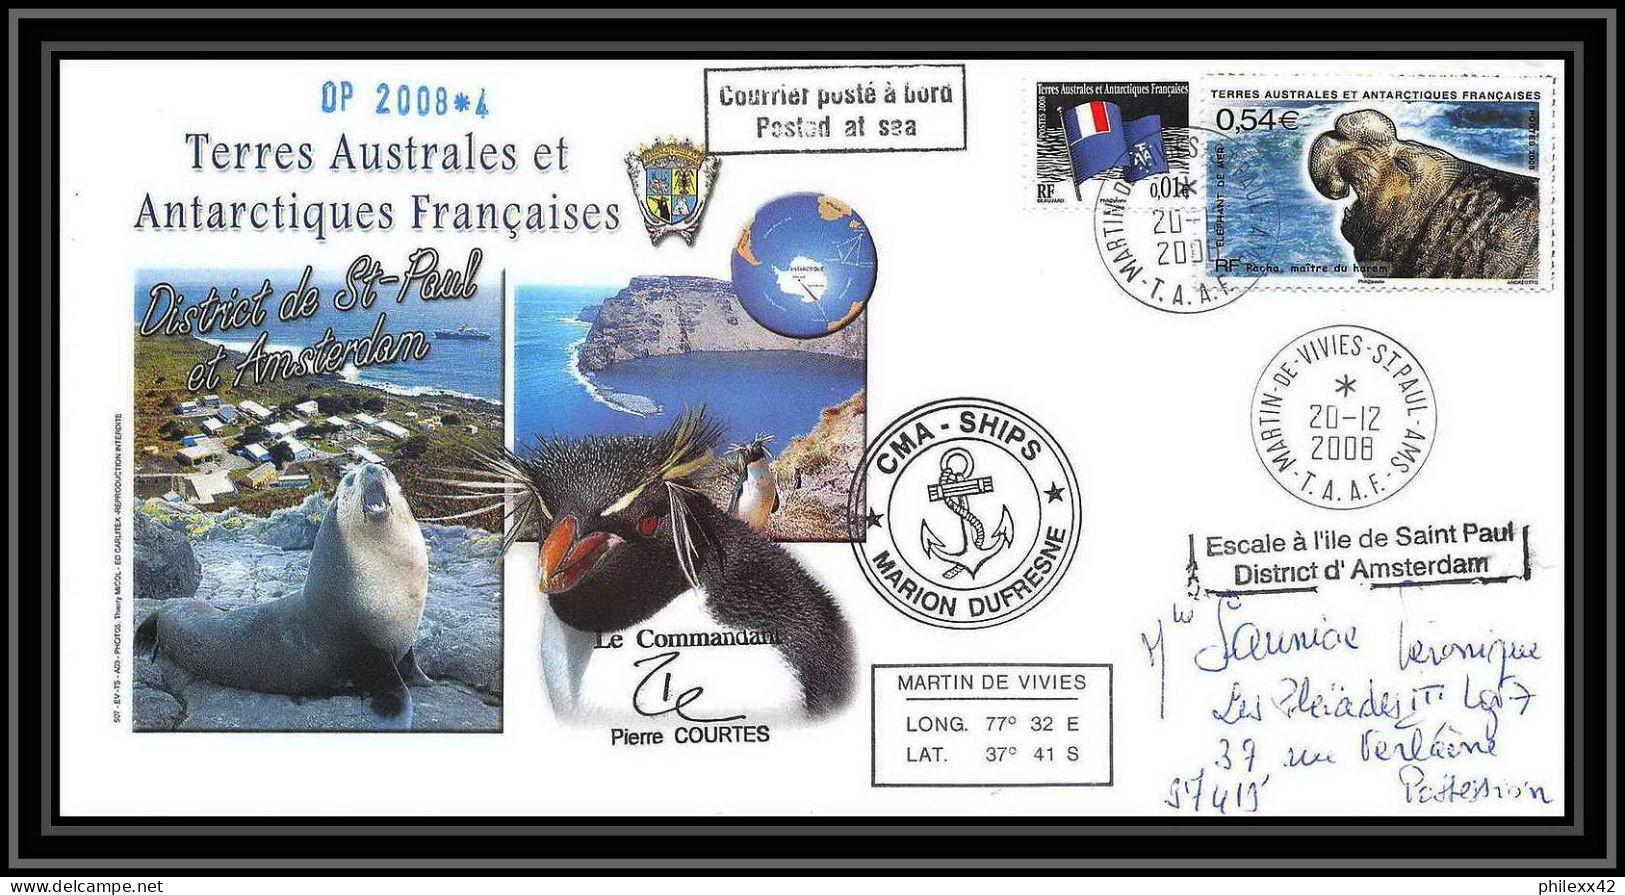 2871 Sea Elephant Terres Australes TAAF Helilagon Lettre Cover Dufresne Signé Signed Op 2008/4 St Paul 20/12/2008 N°511 - Helicopters